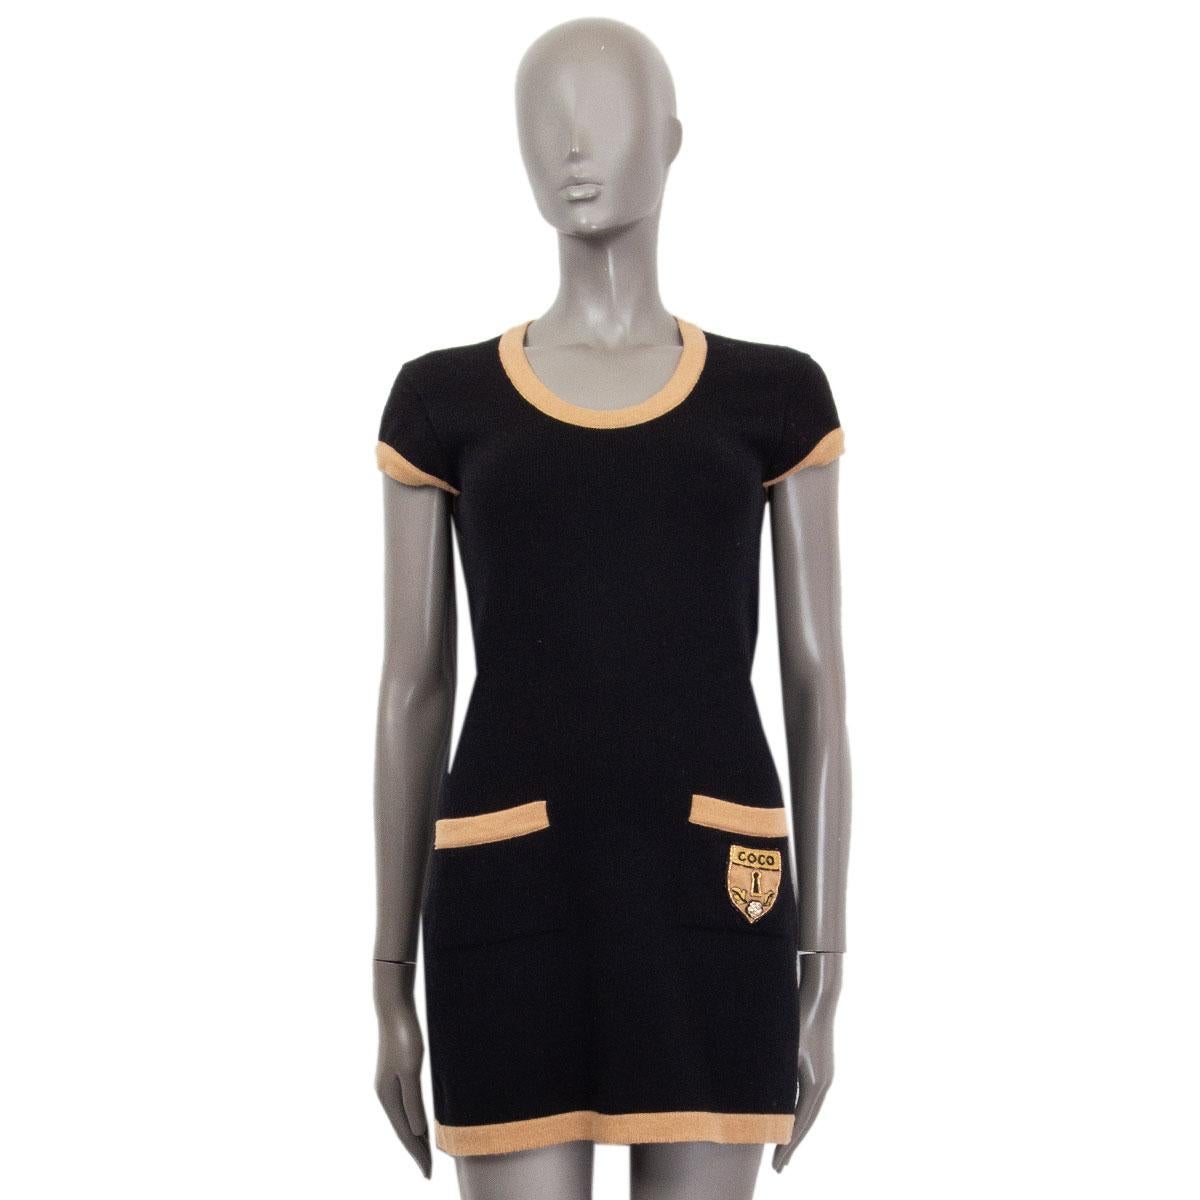 100% authentic Chanel knit mini dress in black cashmere (100%) with camel rib hems. Two front pockets with a beaded 'Coco Keyhole' patch. Has been worn wit a small hole on the first layer of cashmere on the neck. Can get repaired. Overall in very